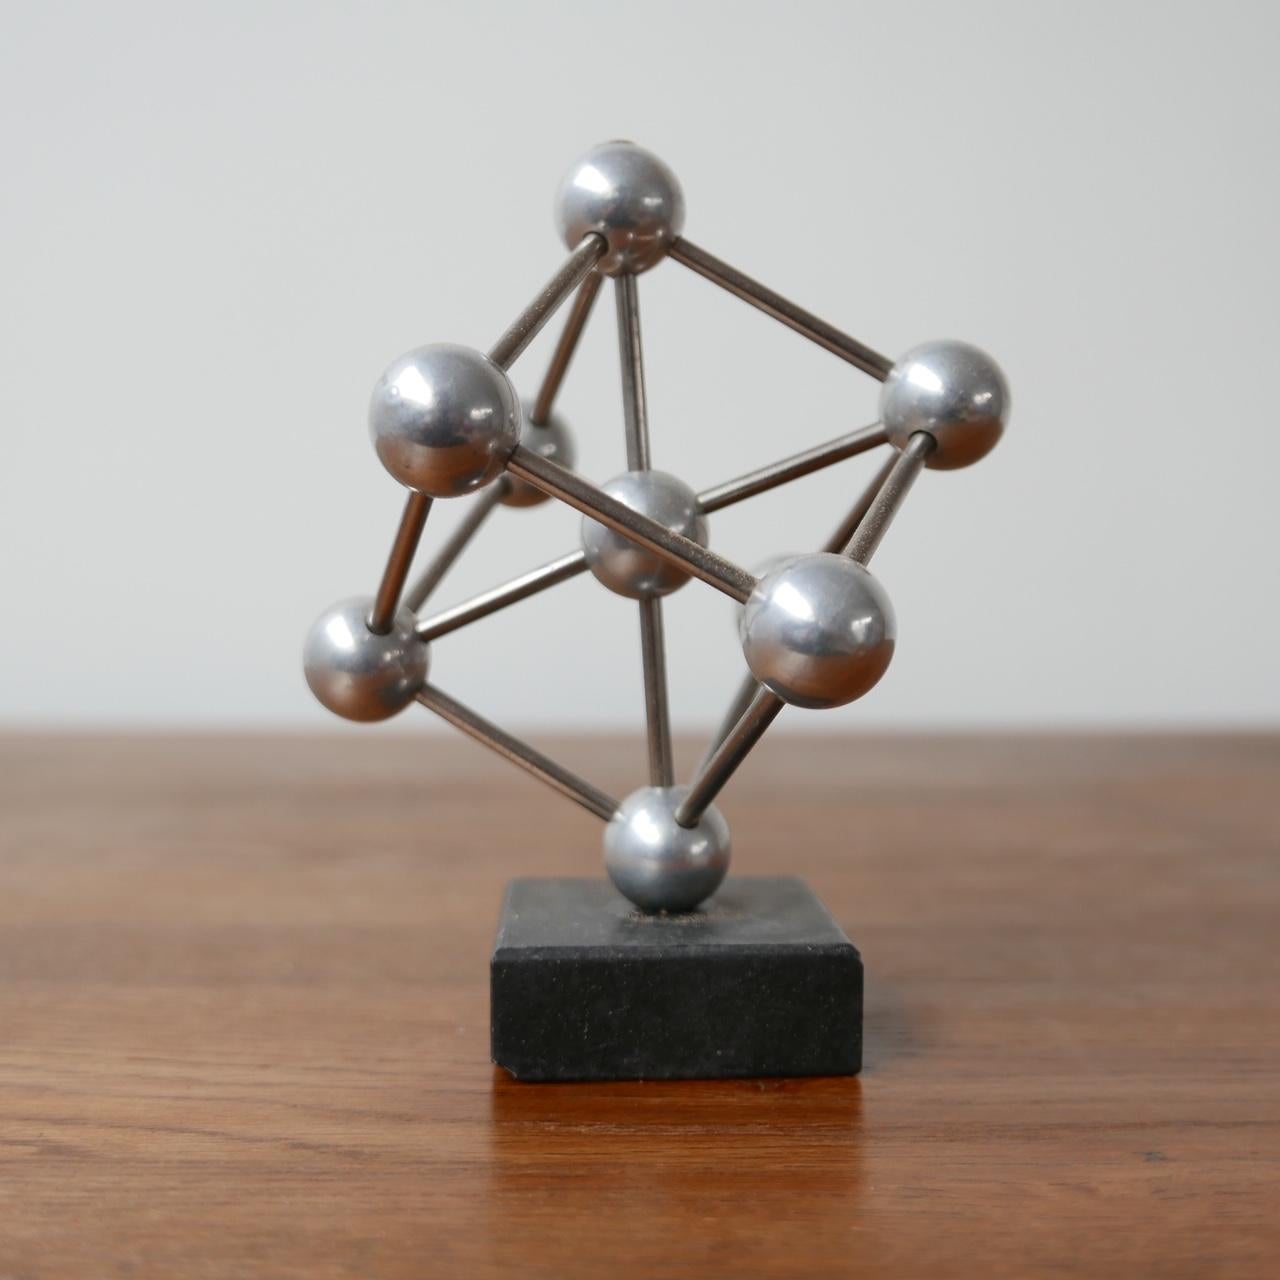 A small desk top model of the Atomium building in Brussels. 

Marble base, metal model. 

Belgium, c1970s. 

Some small nicks to the marble base, wear commensurate with age. 

Location: London Gallery. 

Dimensions: 15 H x 12 D x 15 W in